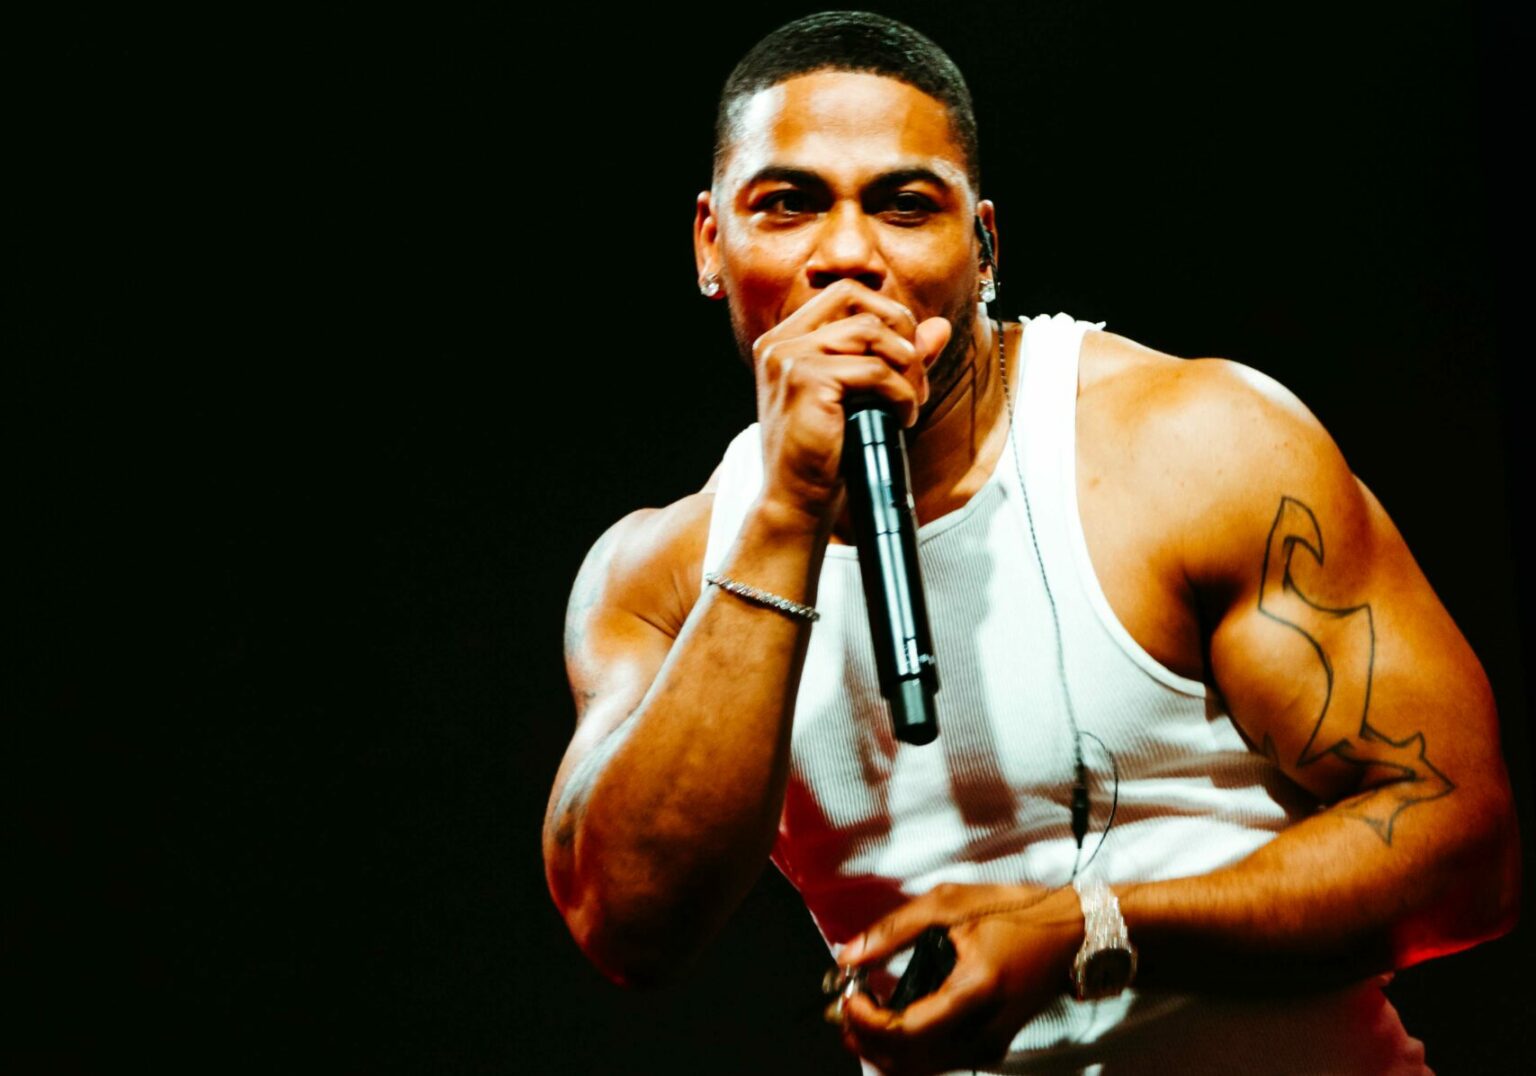 Watch Nelly LIVE in 360° on smartphones and VR headsets FREE FLAVOURMAG